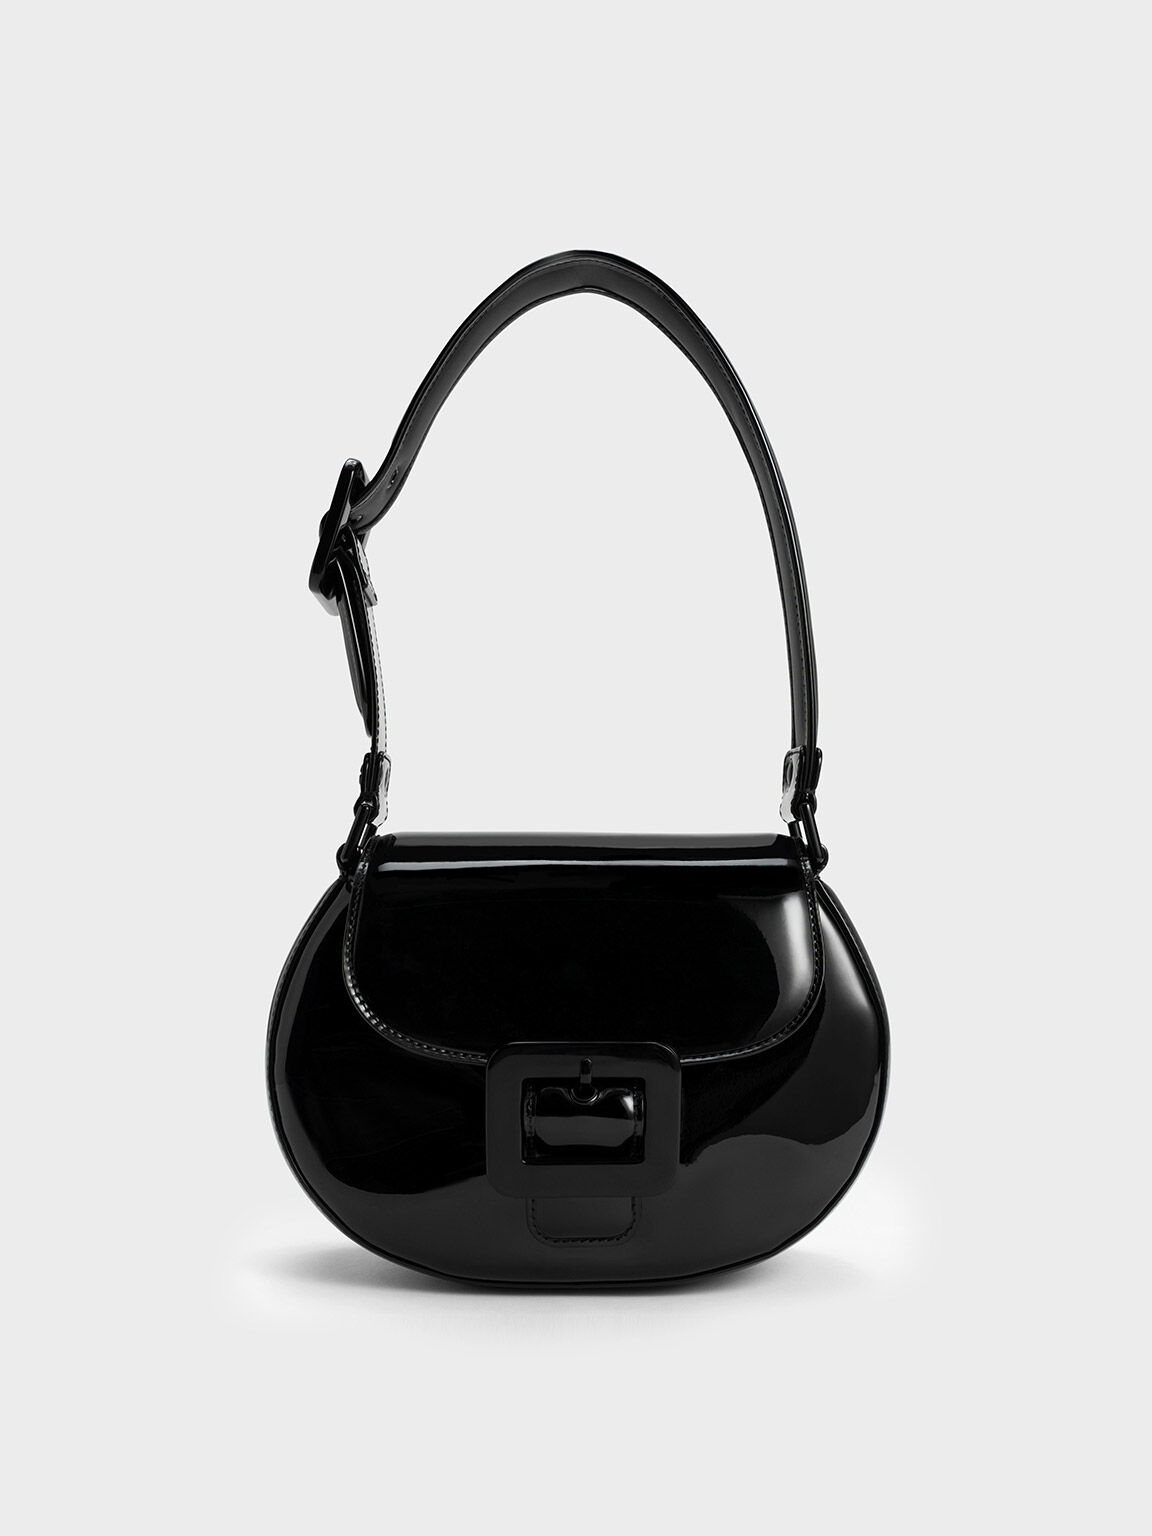 Buy online Charles & Keith Handbags from bags for Women by Shoes